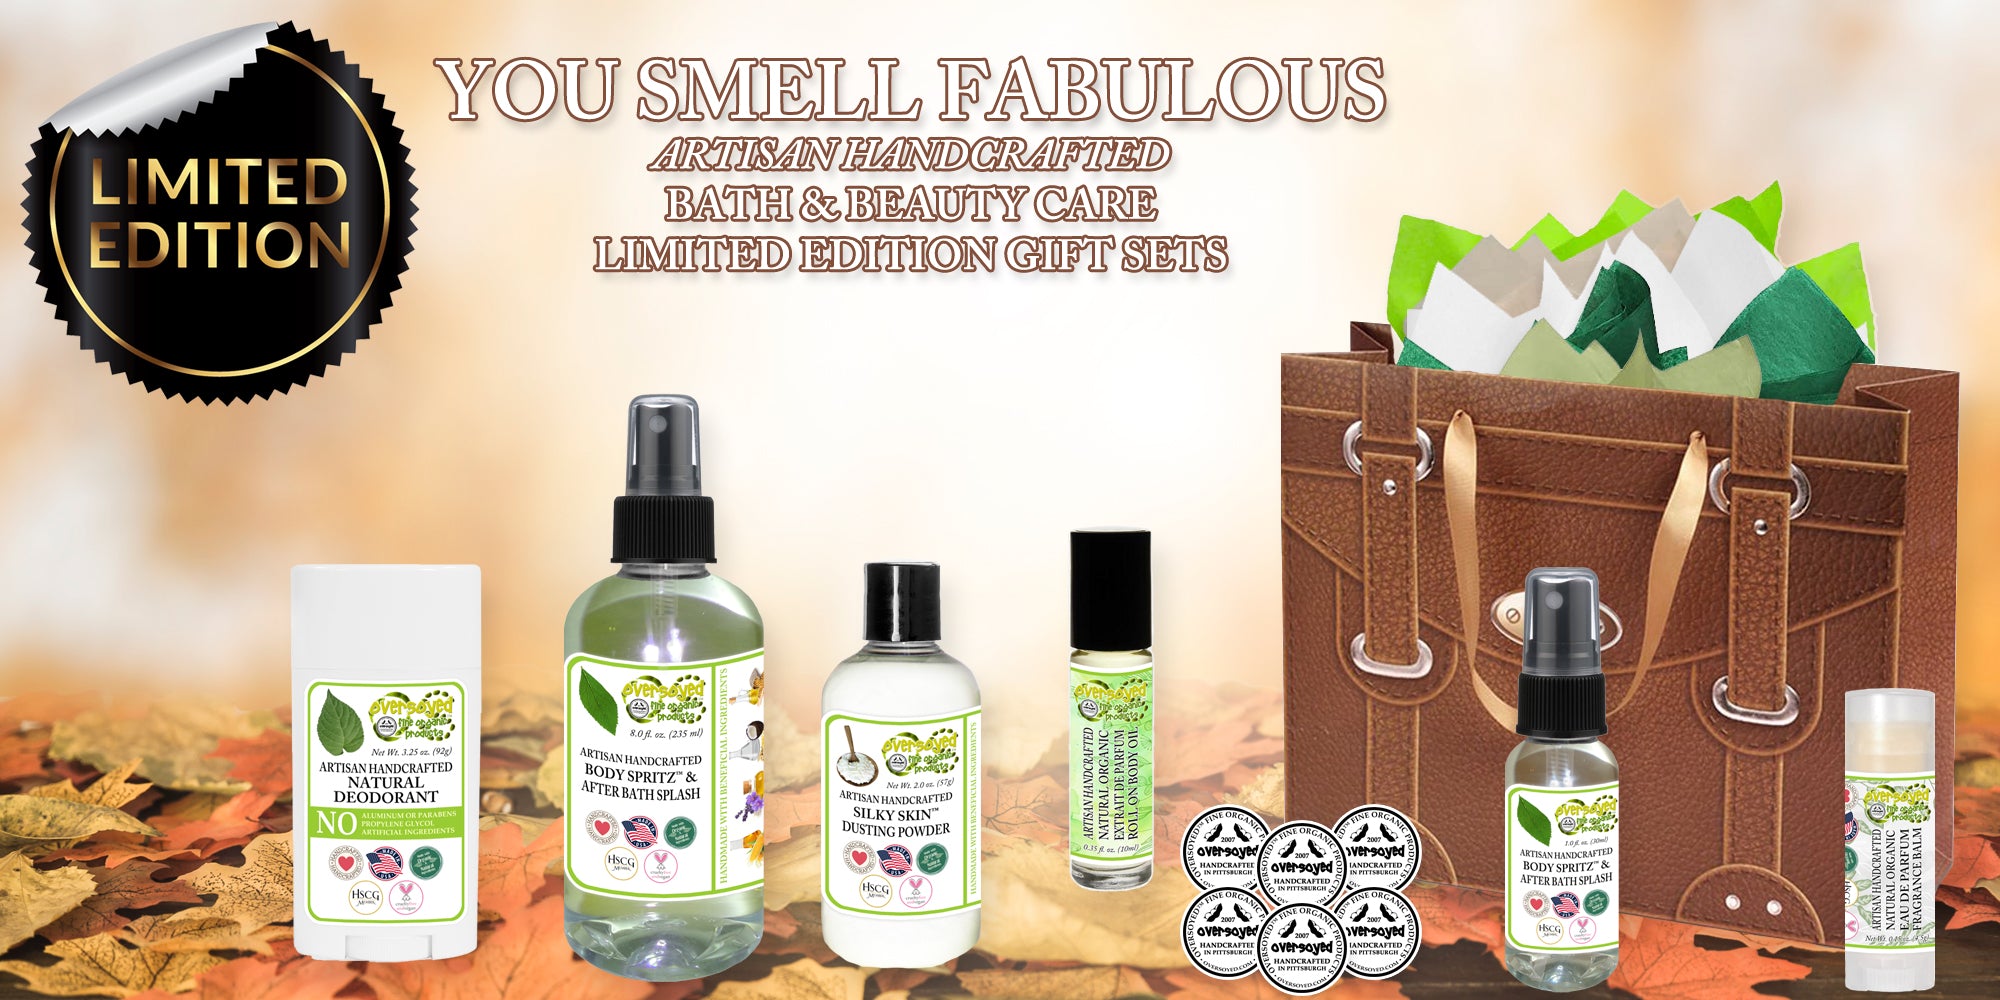 OverSoyed Artisan Handcrafted - You Smell Fabulous Artisan Handcrafted Bath & Beauty Gift Sets